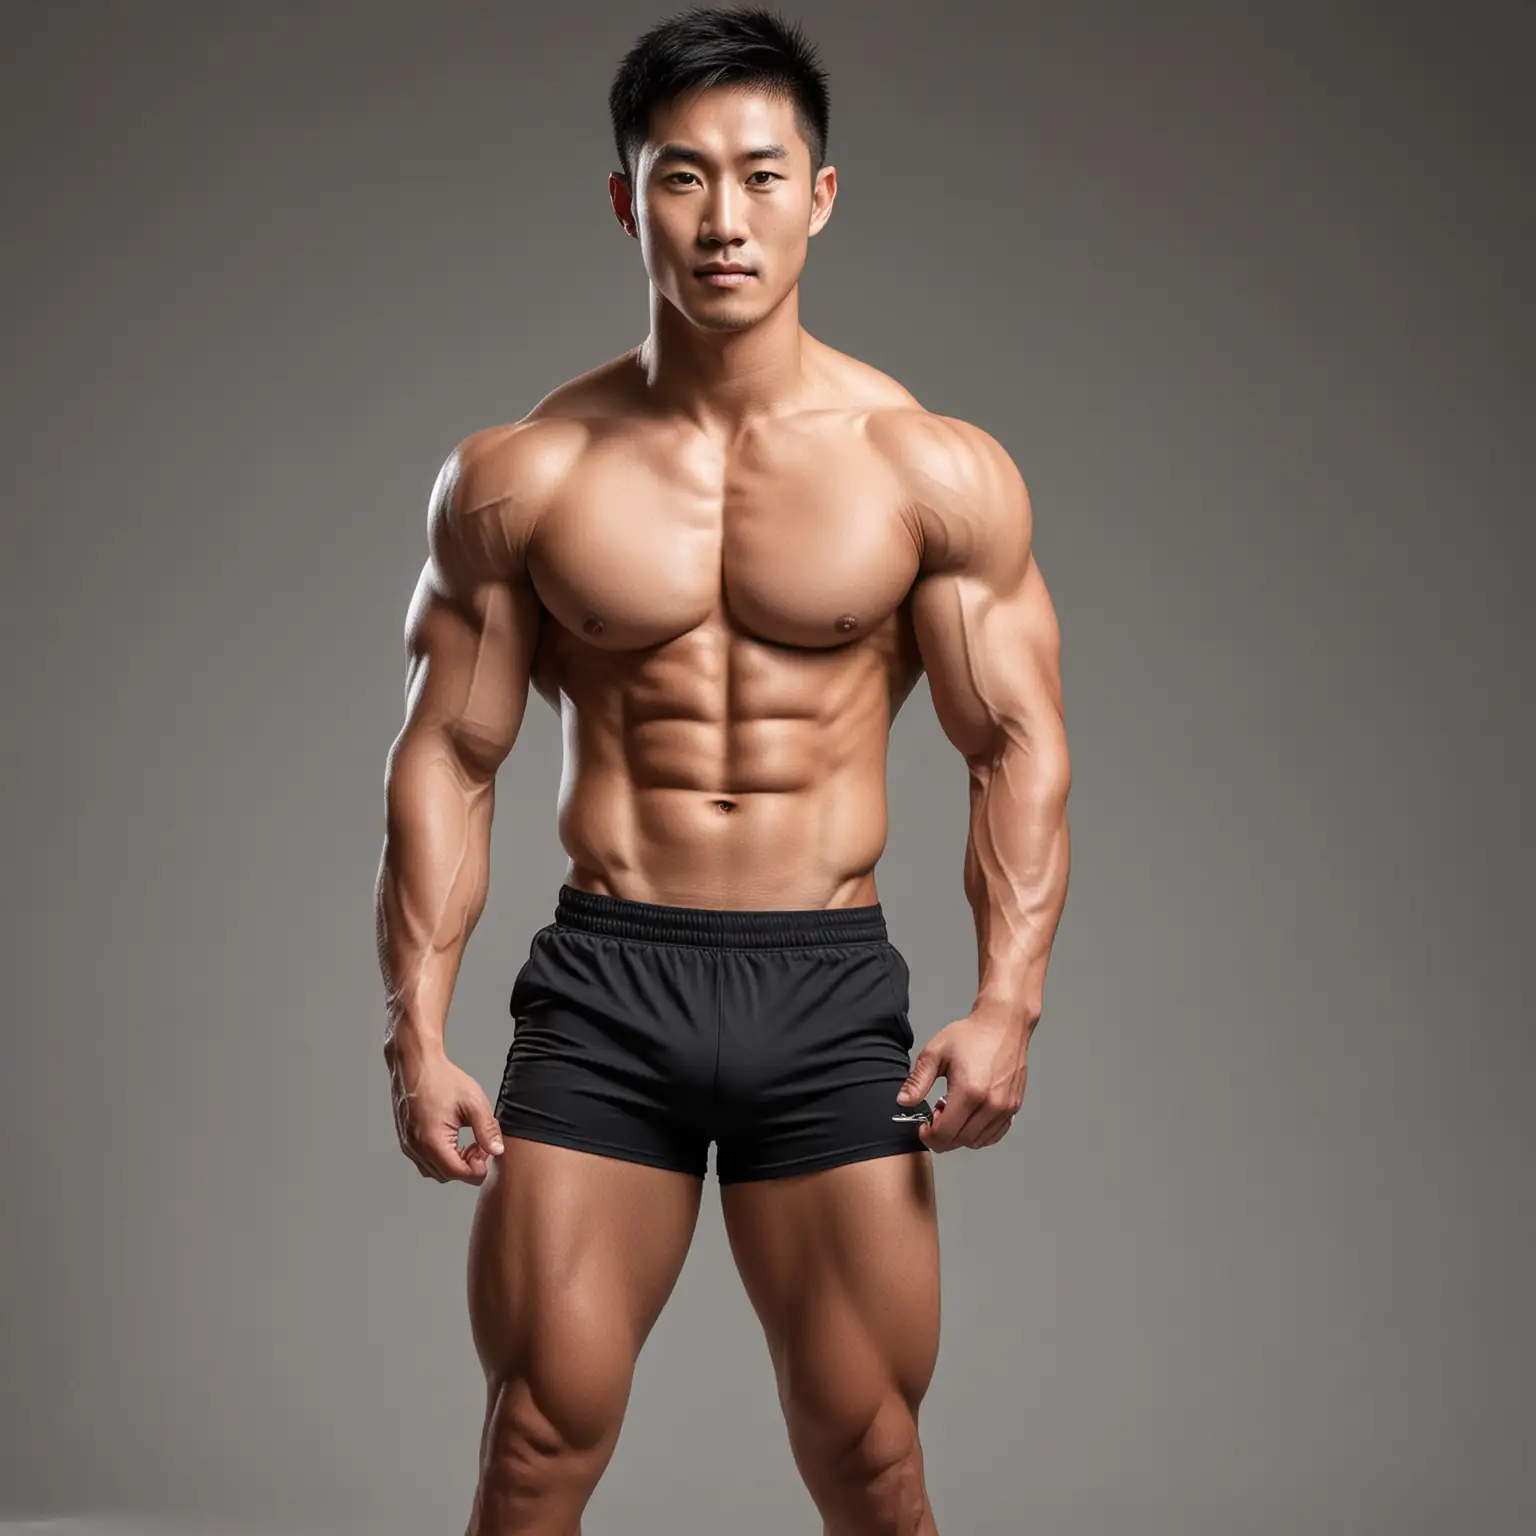 Swarthy-Chinese-Male-Athlete-in-Short-Sports-Pants-with-Developed-Thigh-Muscles